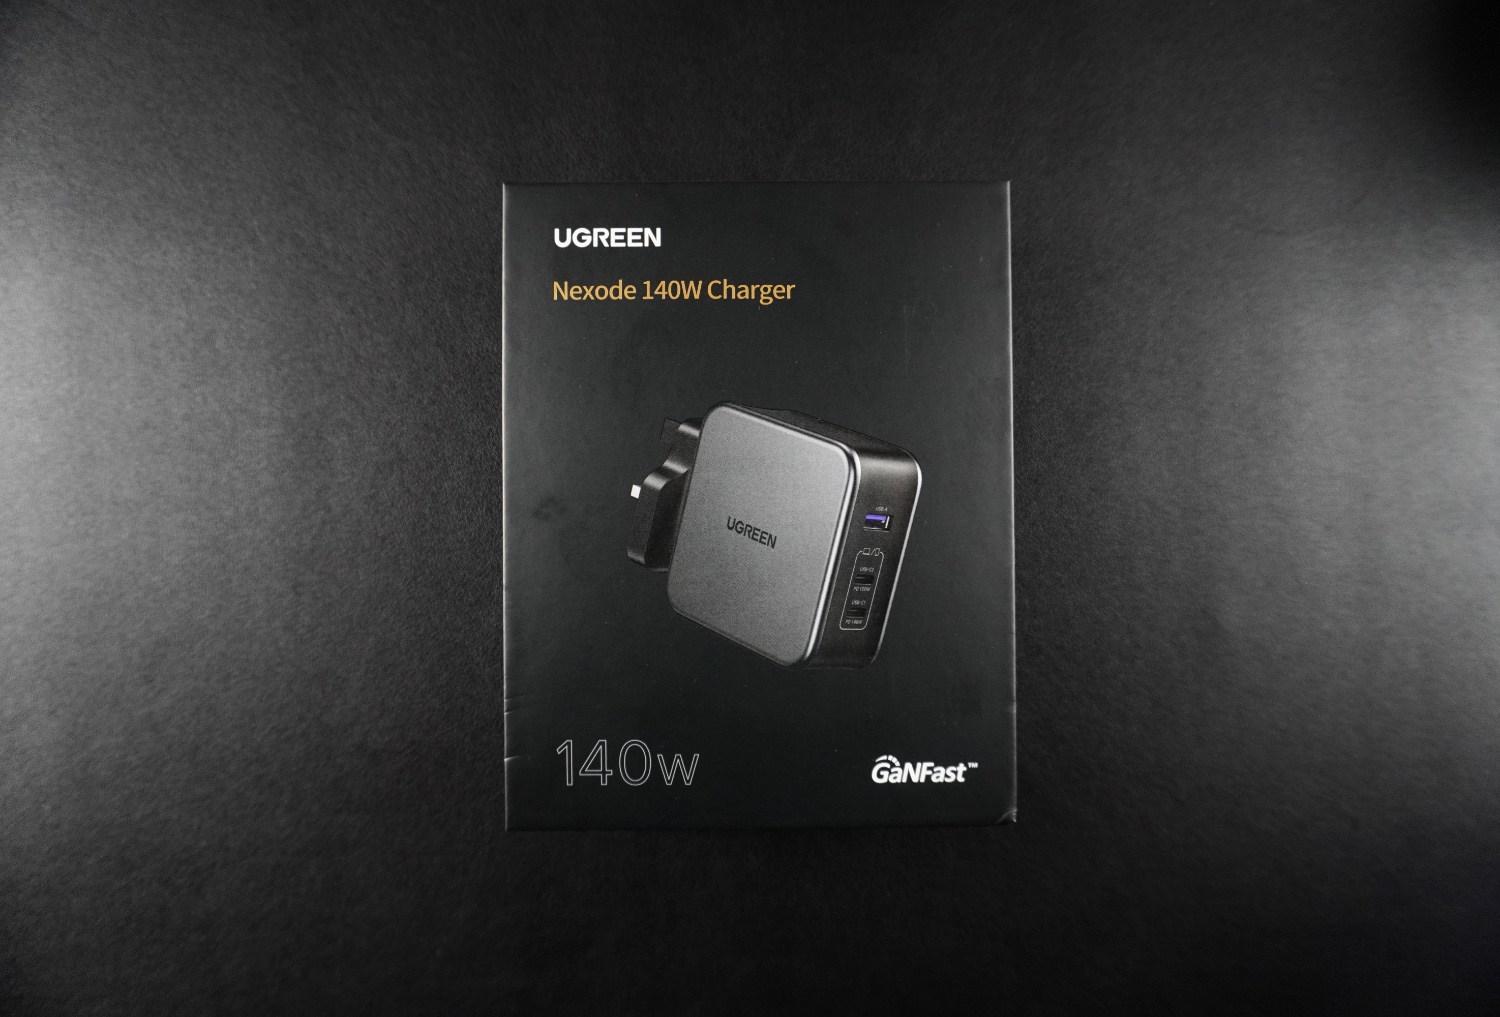 Powerful UGREEN Nexode 140W Charger Can Charge Up To 3 Devices